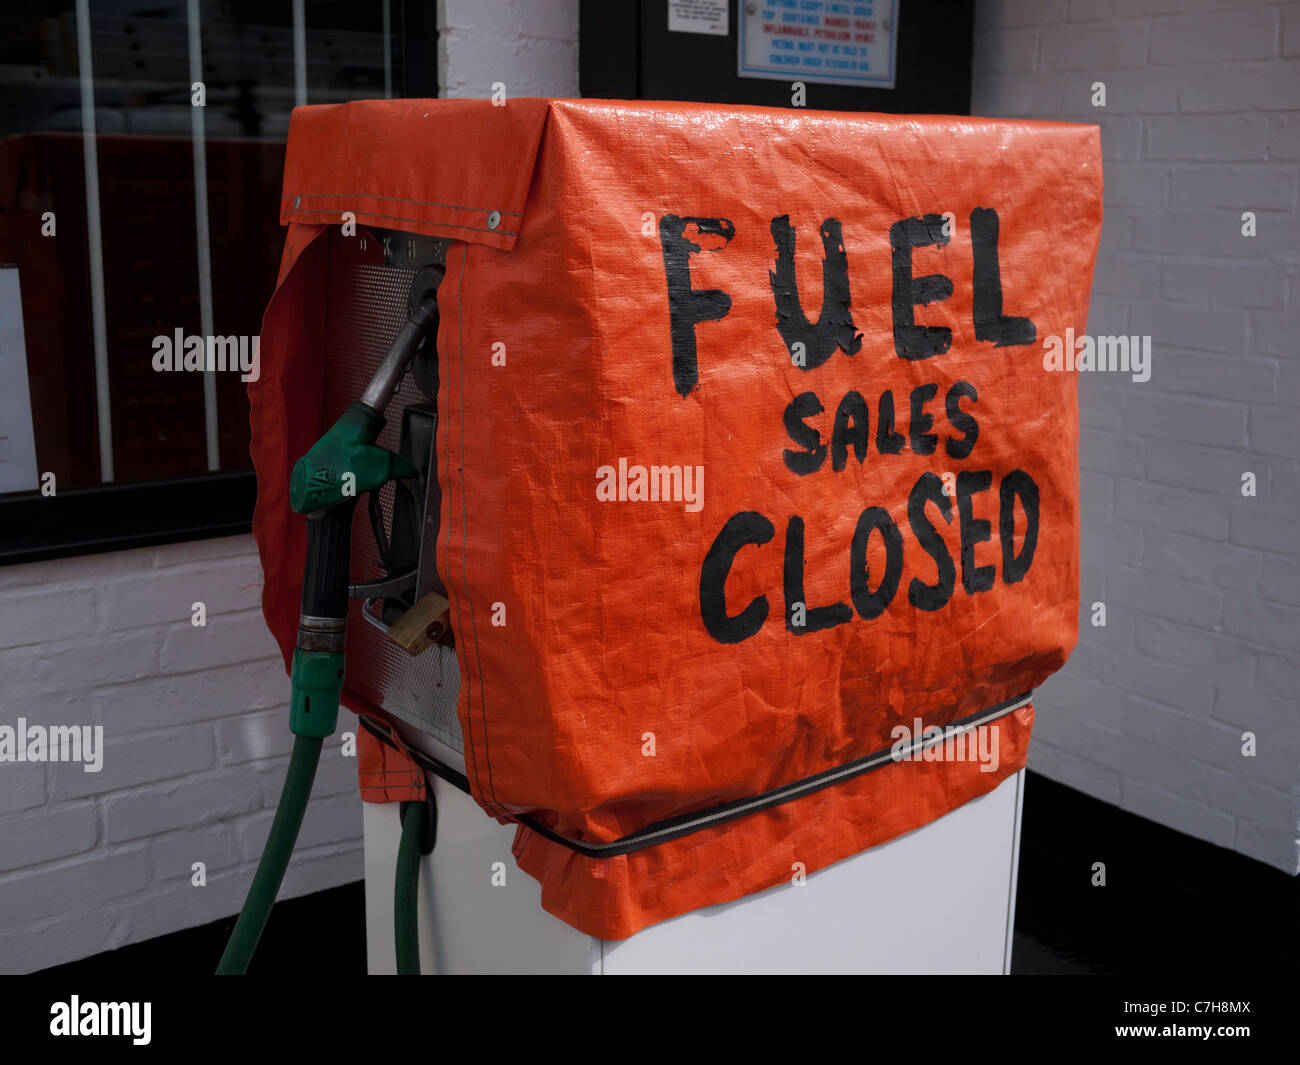 Fuel pump at garage closed due to high cost of petrol and low profits in the recession. Pump covered with closed sign. Stock Photo